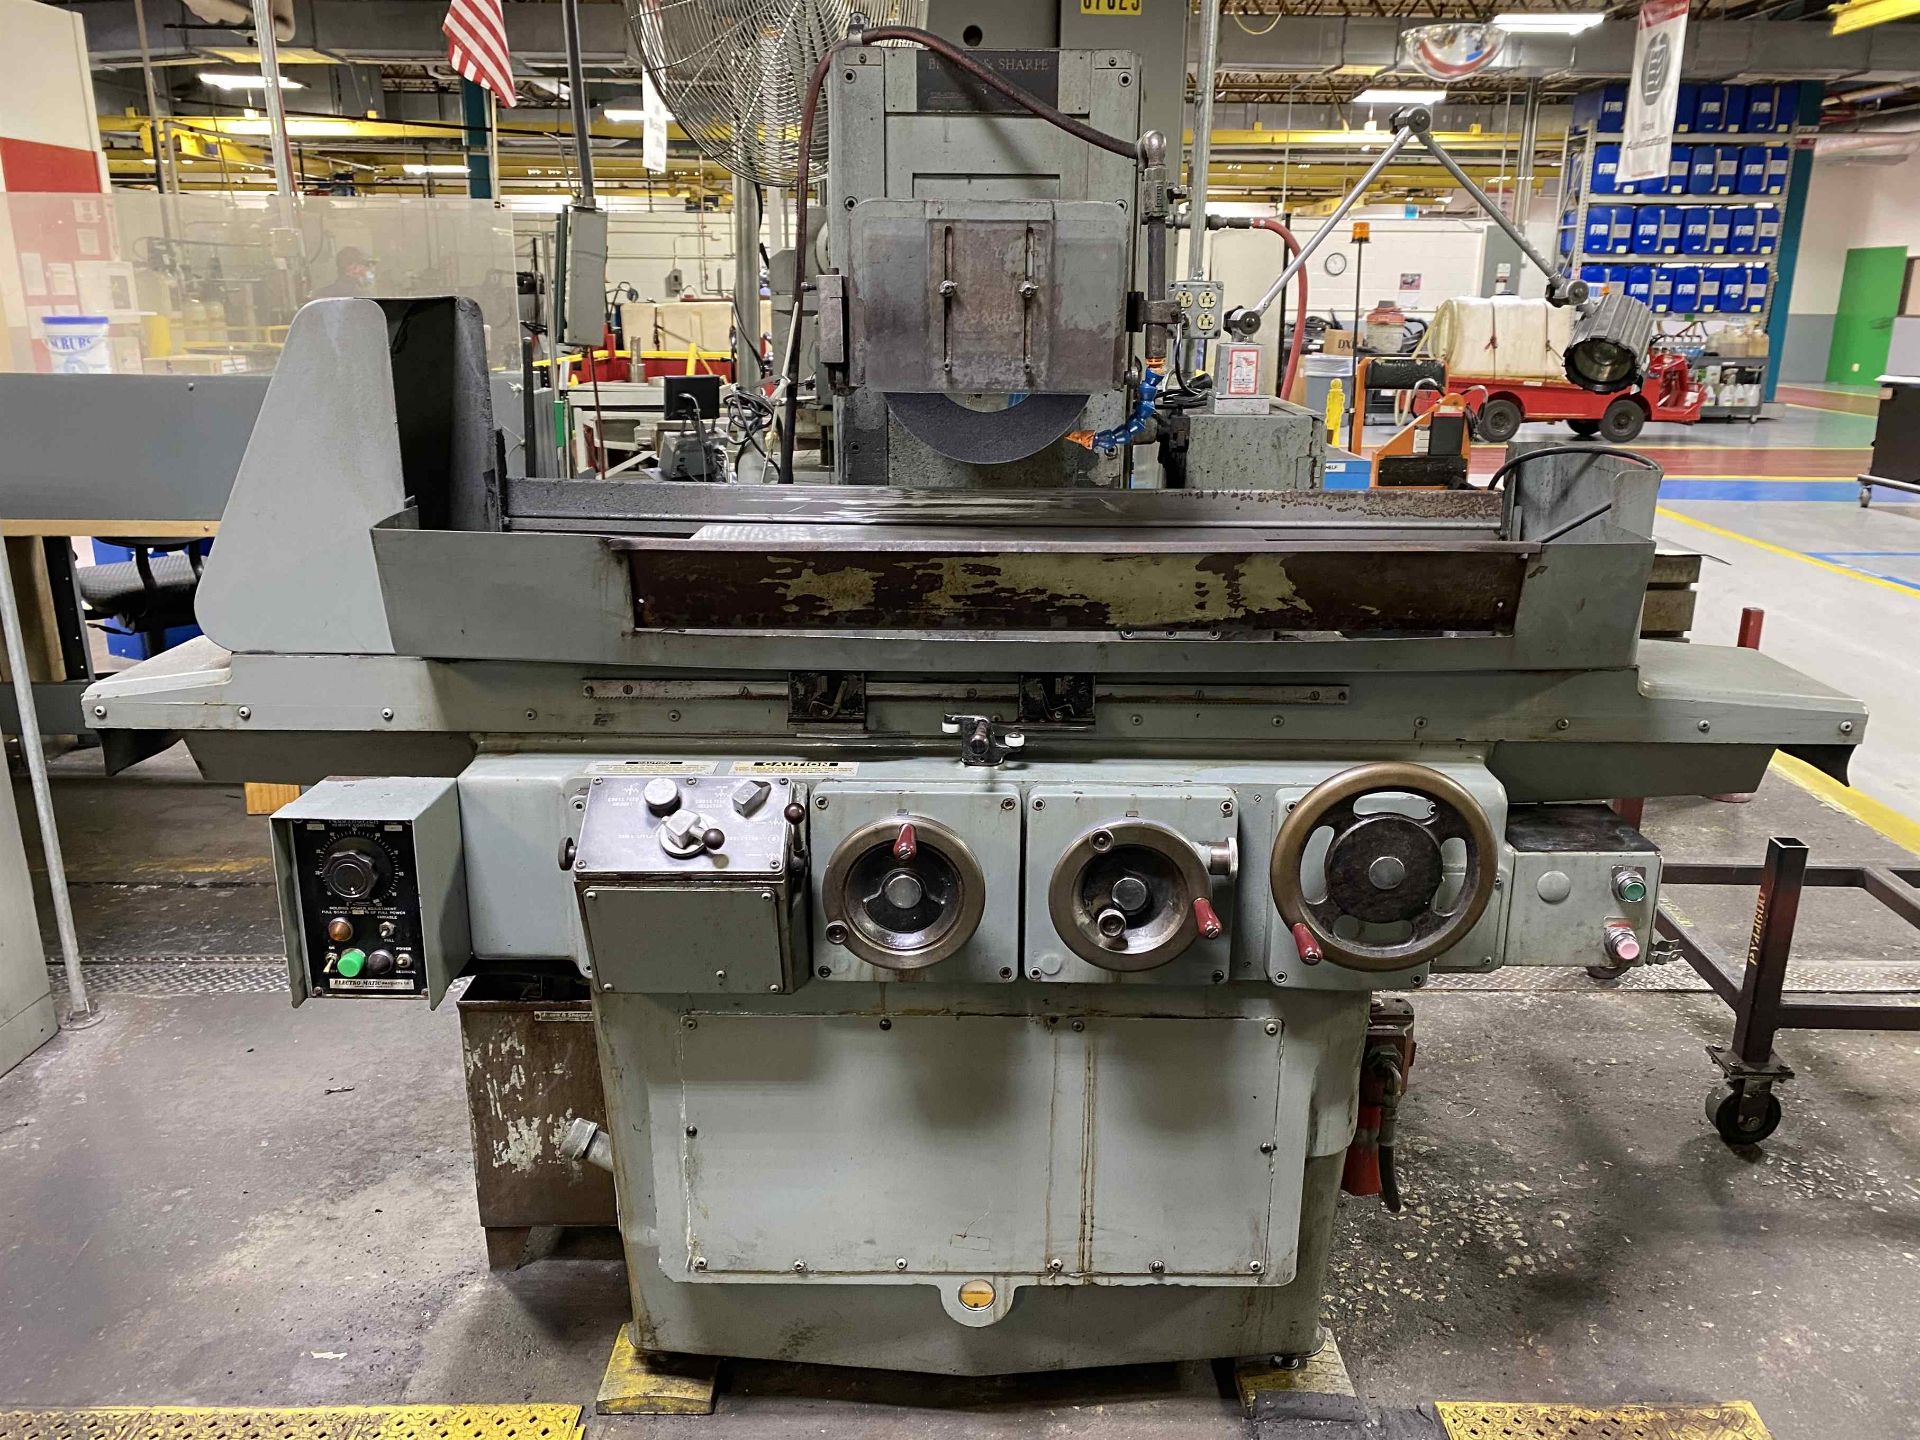 BROWN & SHARPE MICROMASTER 1030 Hydraulic Surface Grinder, s/n 523-1030-284 (NO TOOLING INCLUDED)